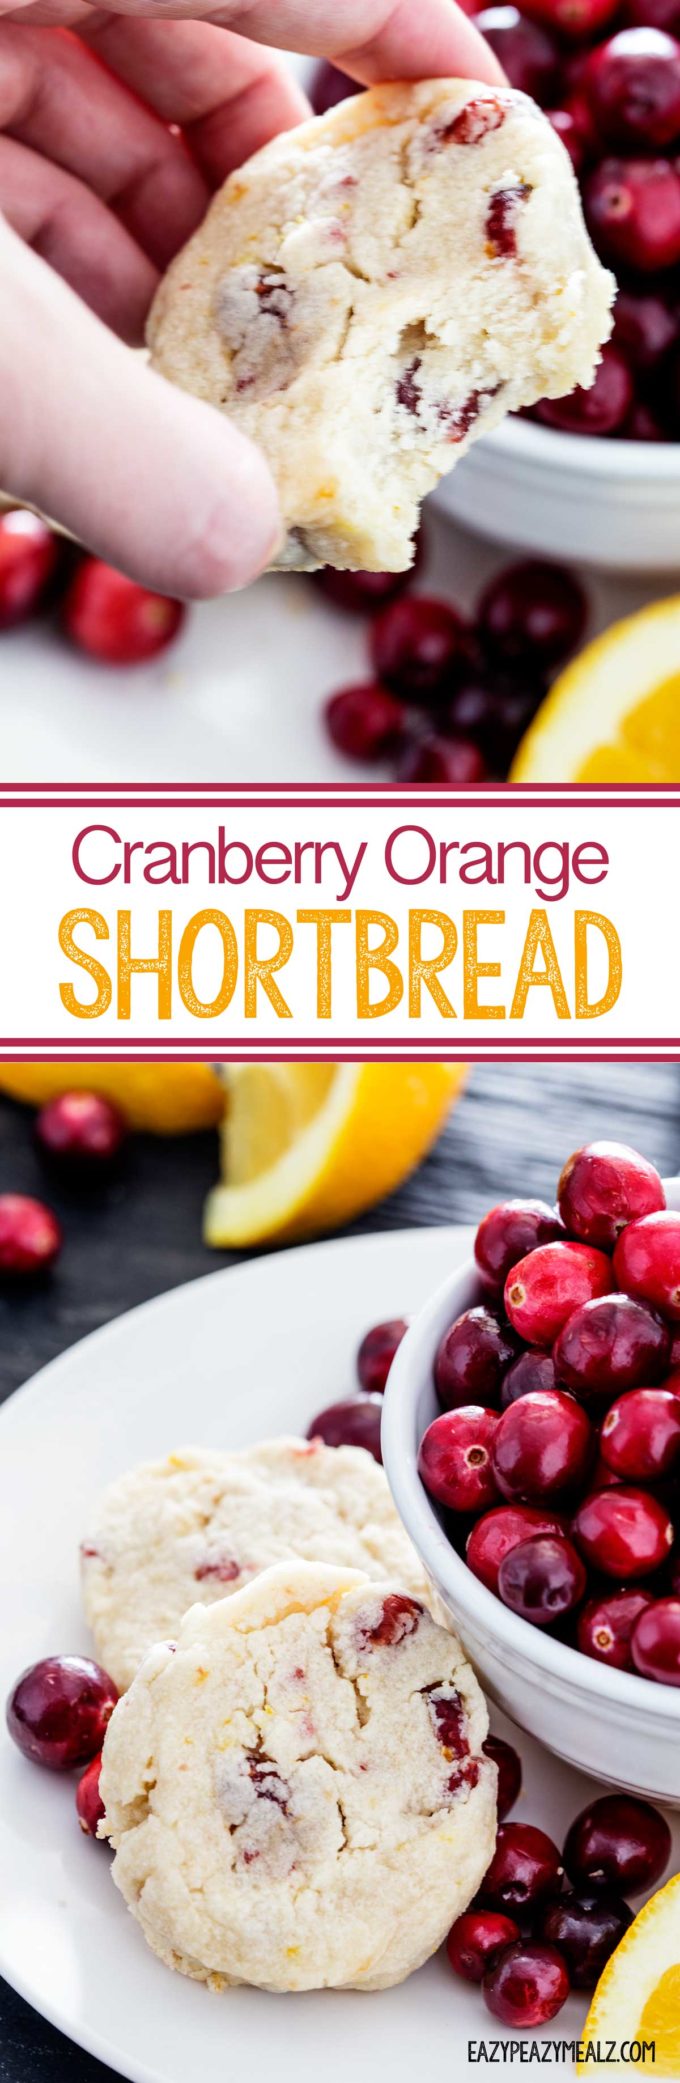 An easy to make, and flavorful Cranberry Orange Shortbread. Great for holiday entertaining. Make these cookies ahead and freeze for easier prep during the holidays. 